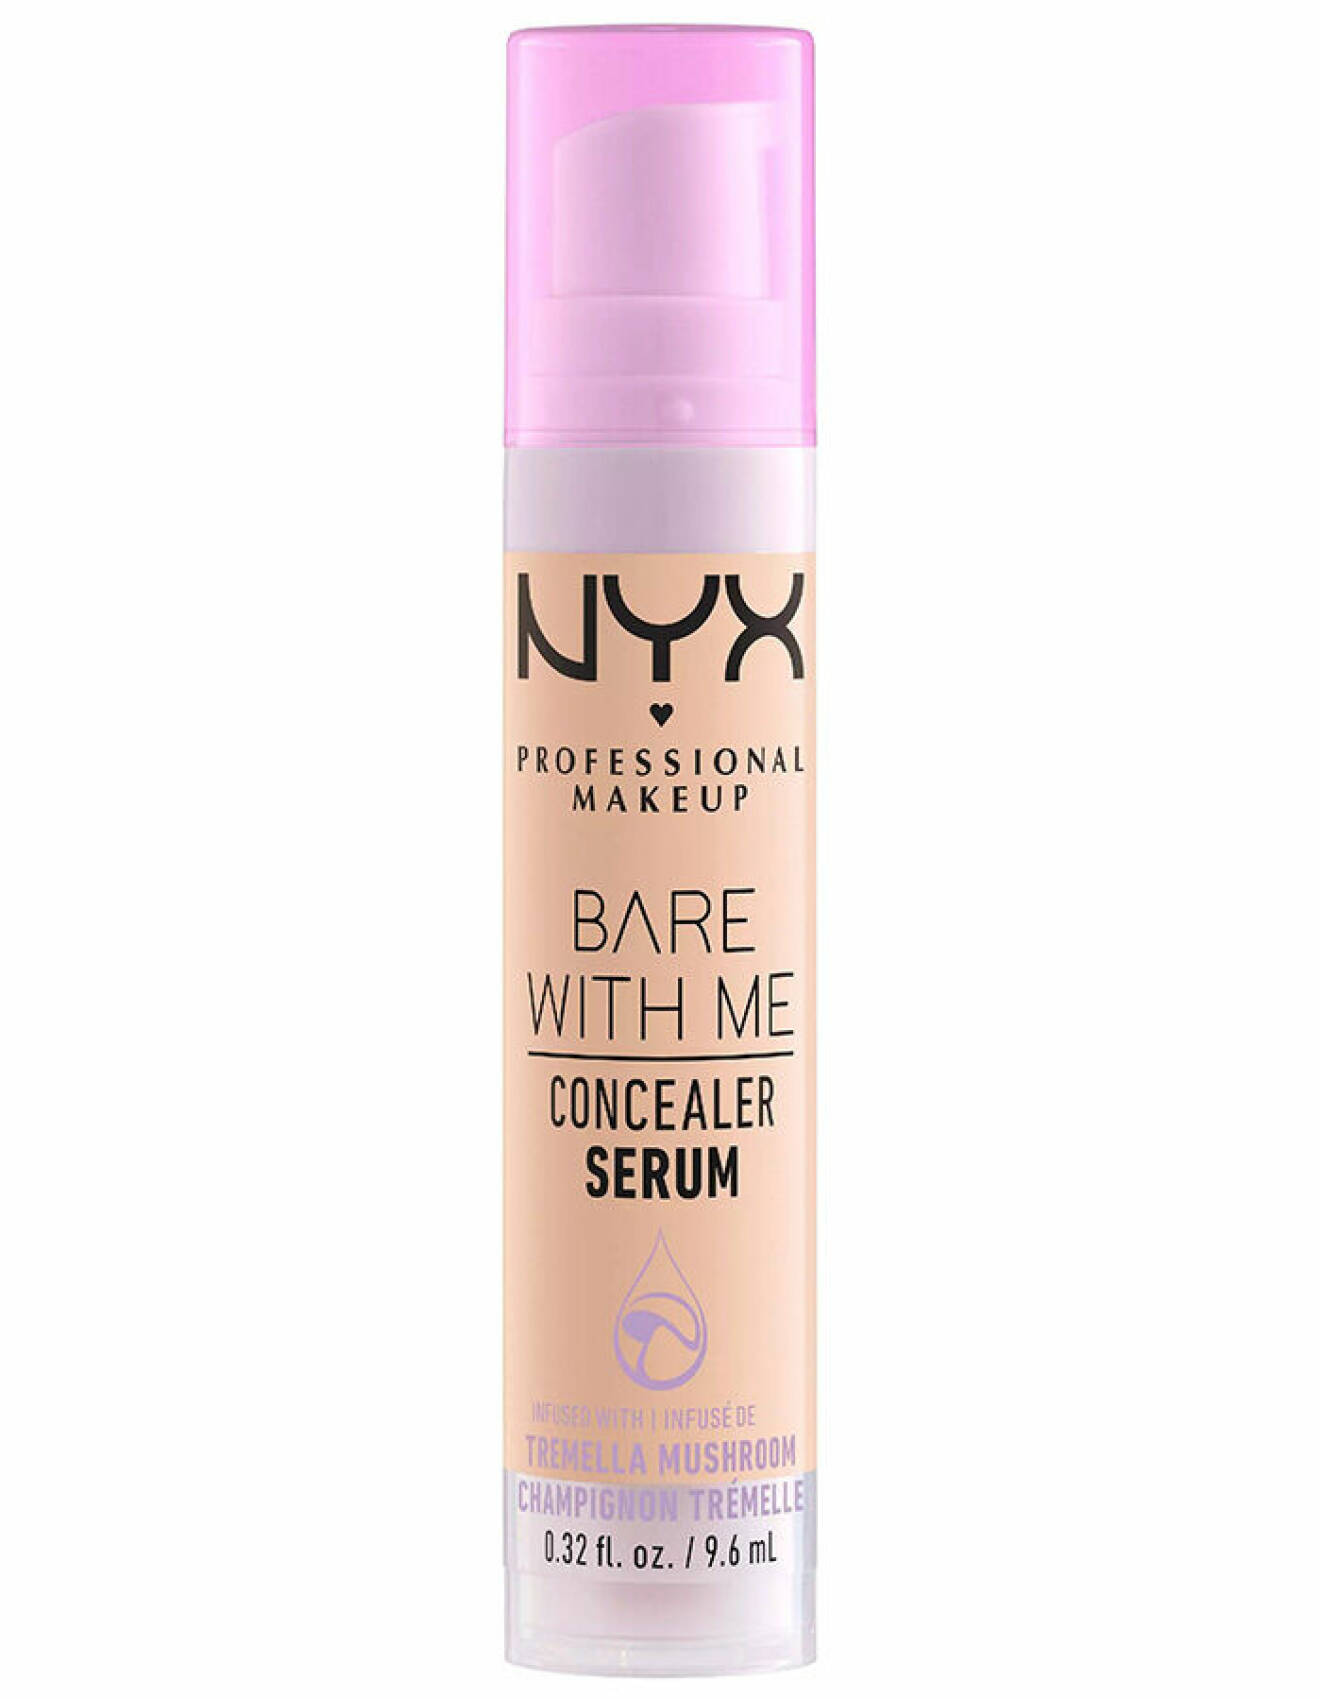 Bare With Me Concealer från Nyx Professionel Makeup